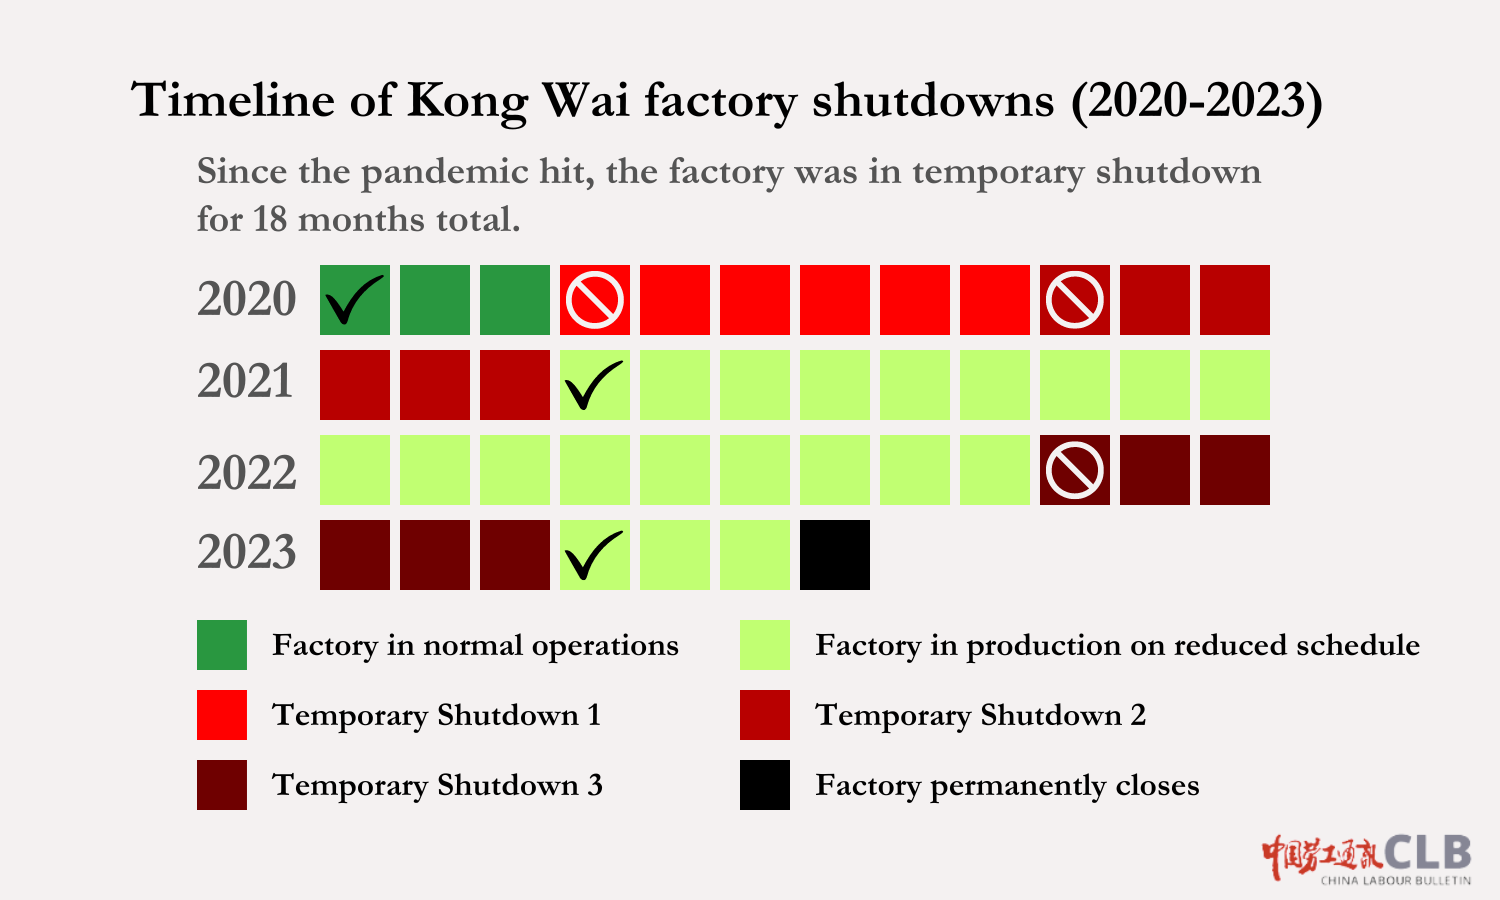 A CLB graphic shows the Kong Wai factory's monthly operations status between 2020 and 2023